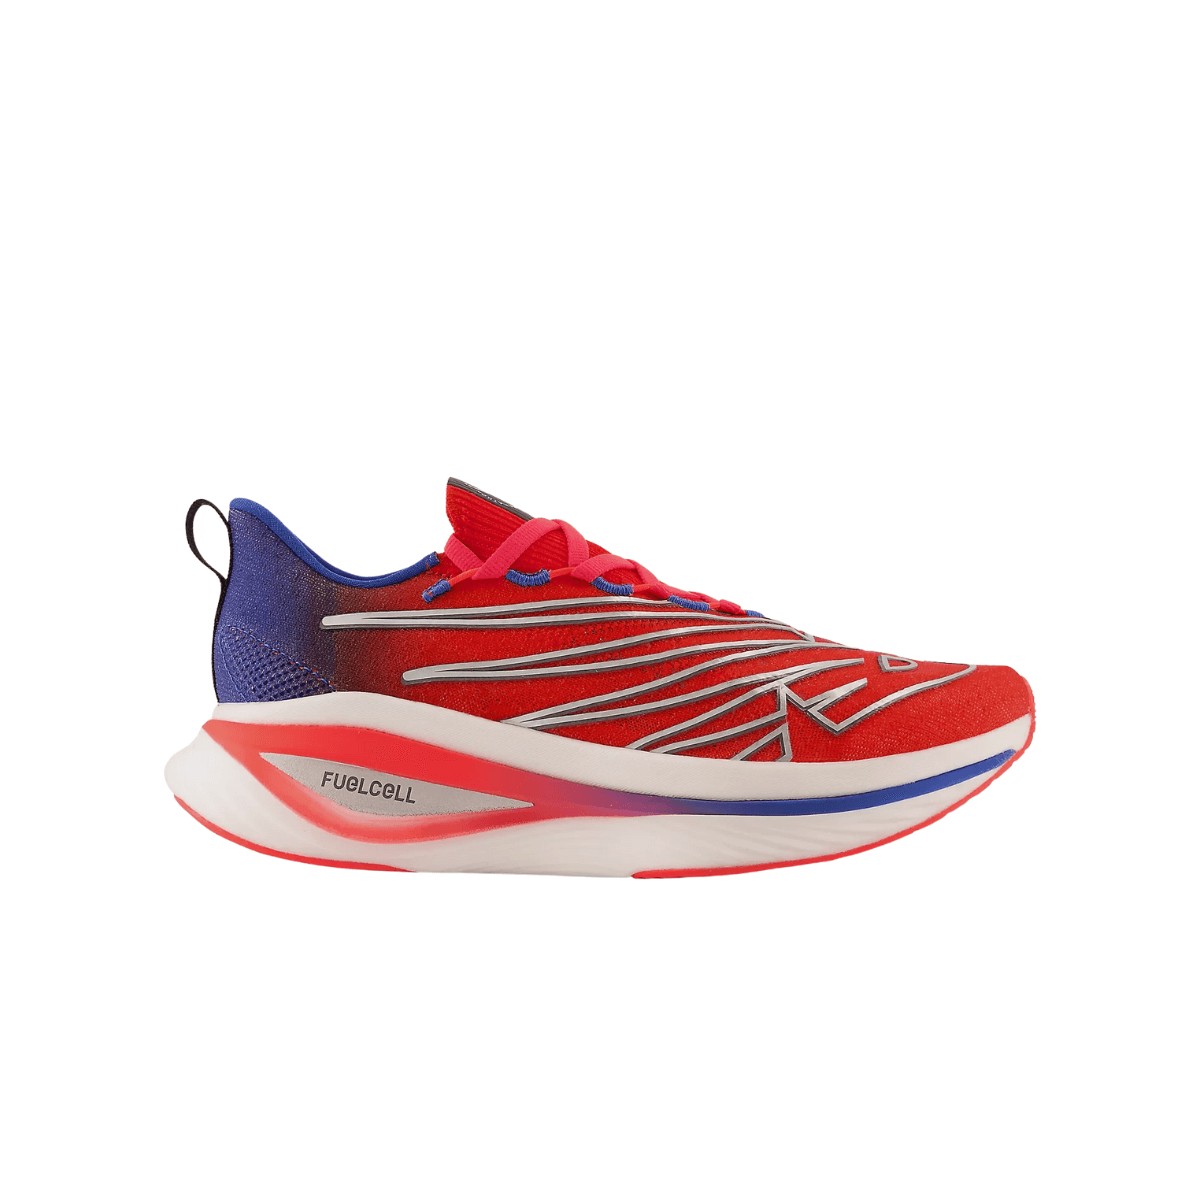 Shoes New Balance FuelCell SC Elite V3 NYC Marathon Red Blue AW22 Woman, Size 37,5 - EUR